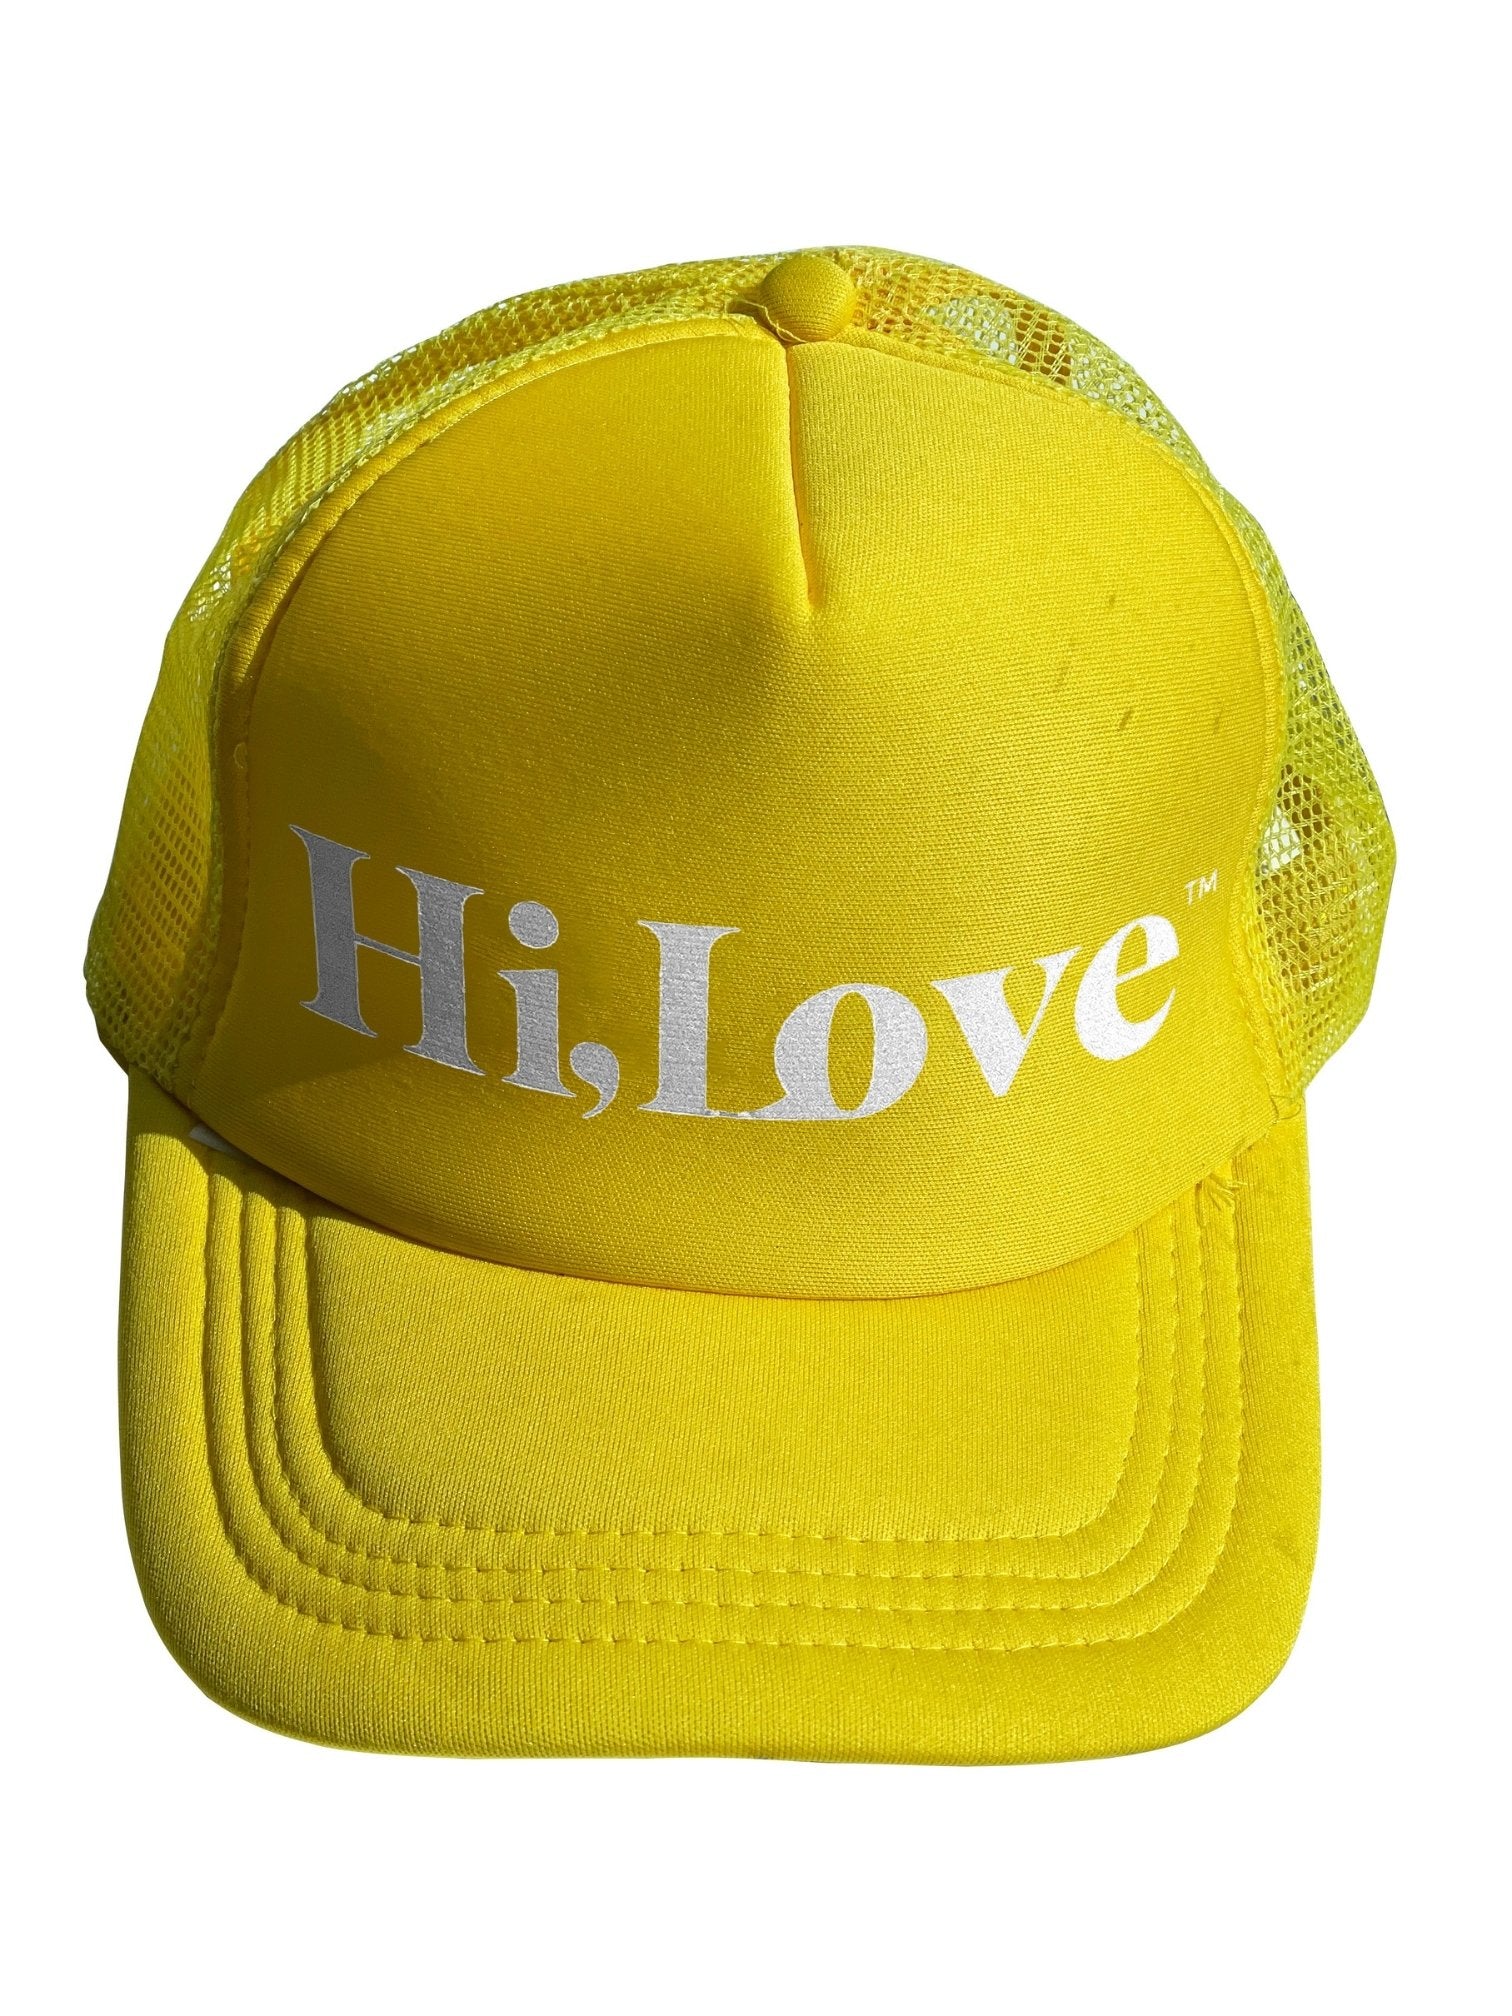 Travel Hat - Daffodil Yellow with White "Hi Love"